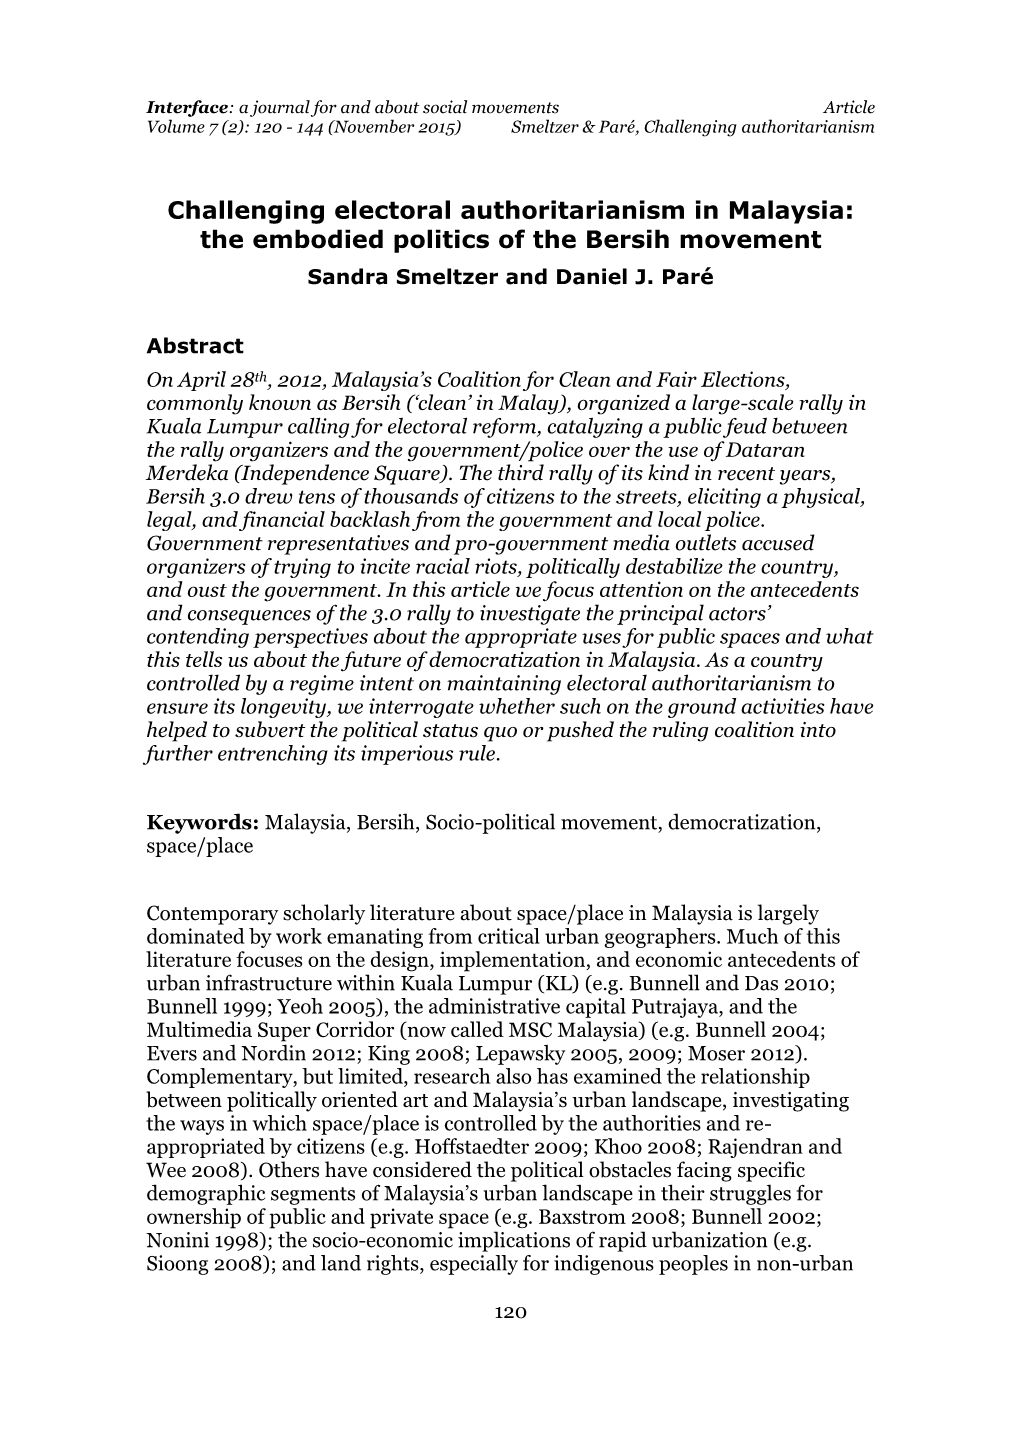 Challenging Electoral Authoritarianism in Malaysia: the Embodied Politics of the Bersih Movement Sandra Smeltzer and Daniel J